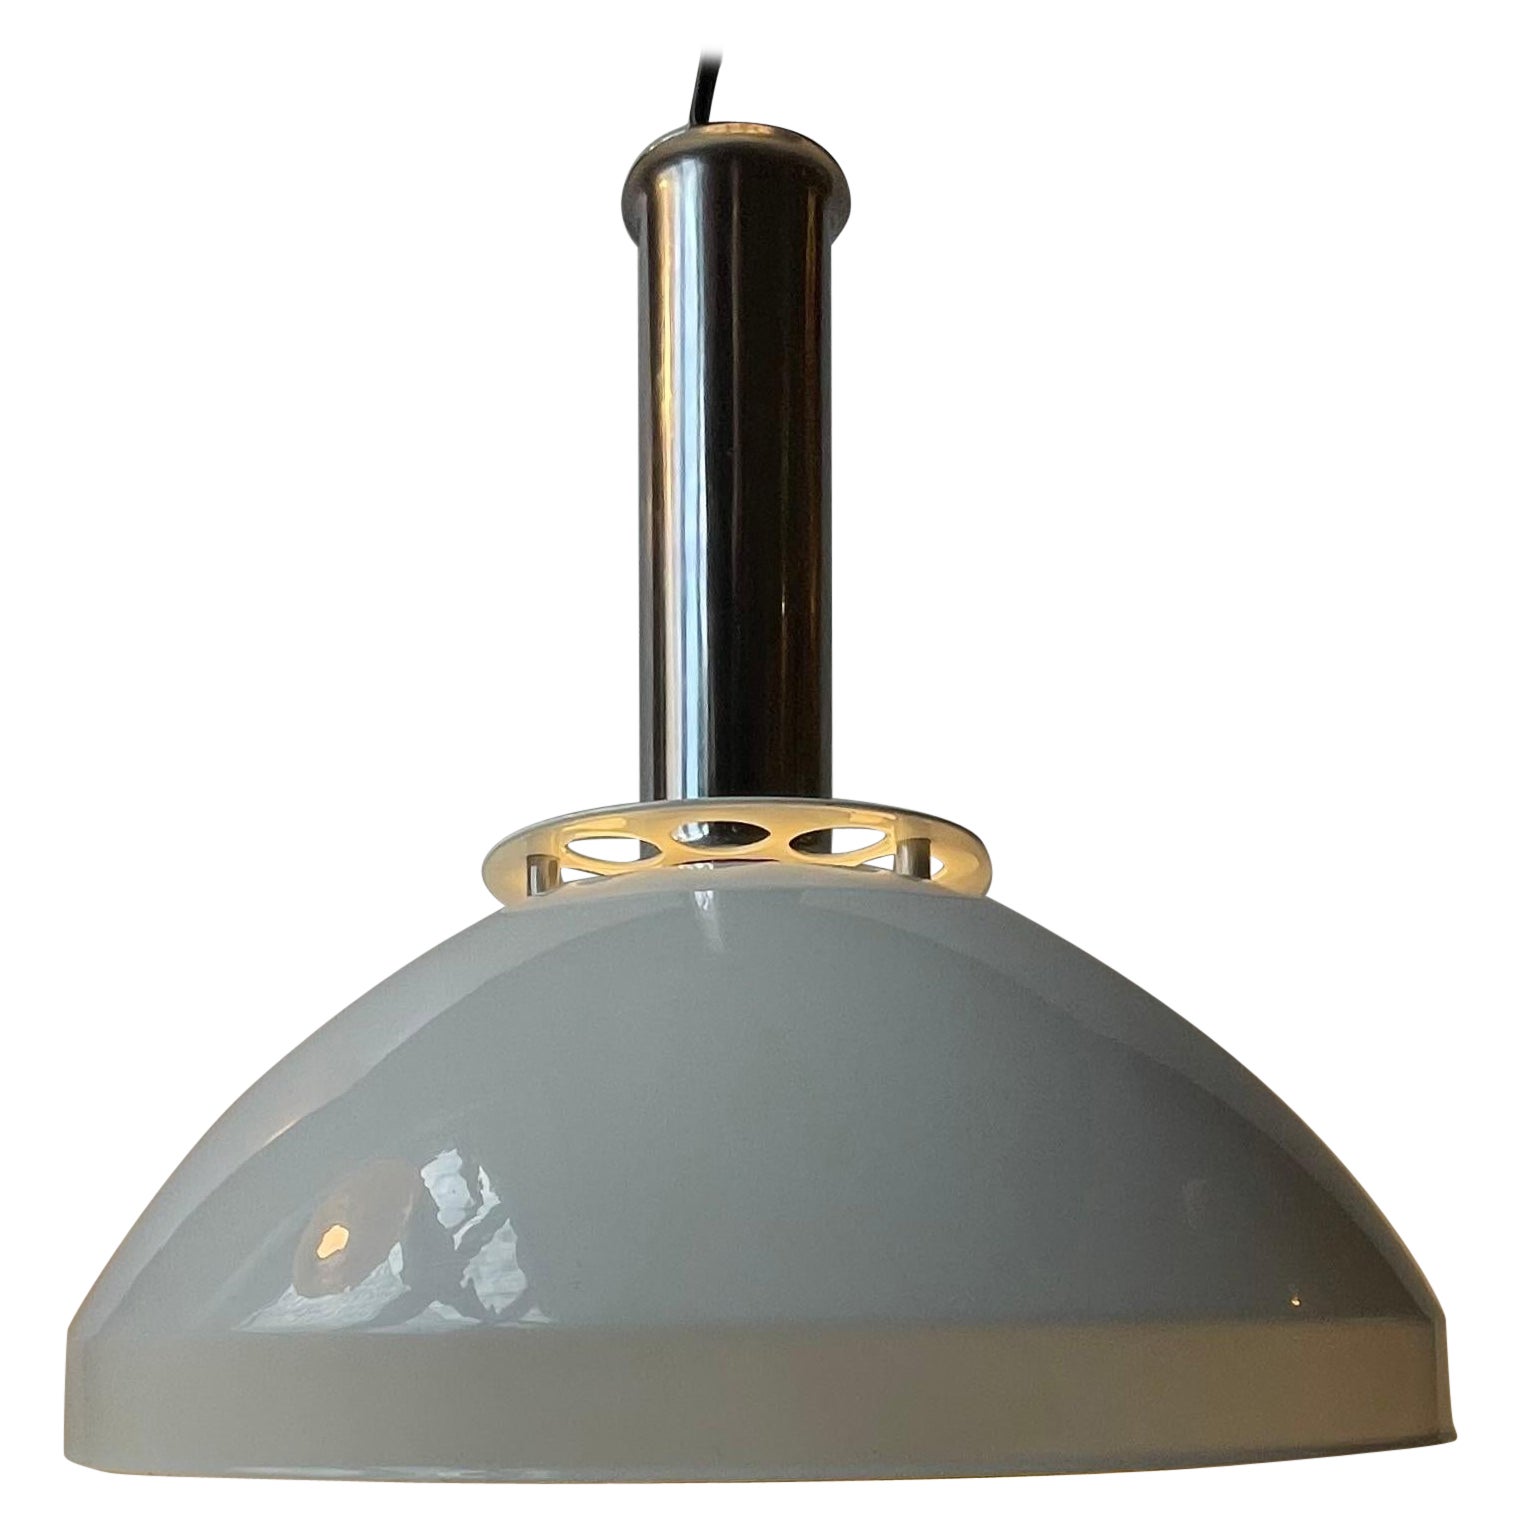 Italian Industrial Ceiling Lamp in White Enamel and Chrome Plating, 1970s For Sale